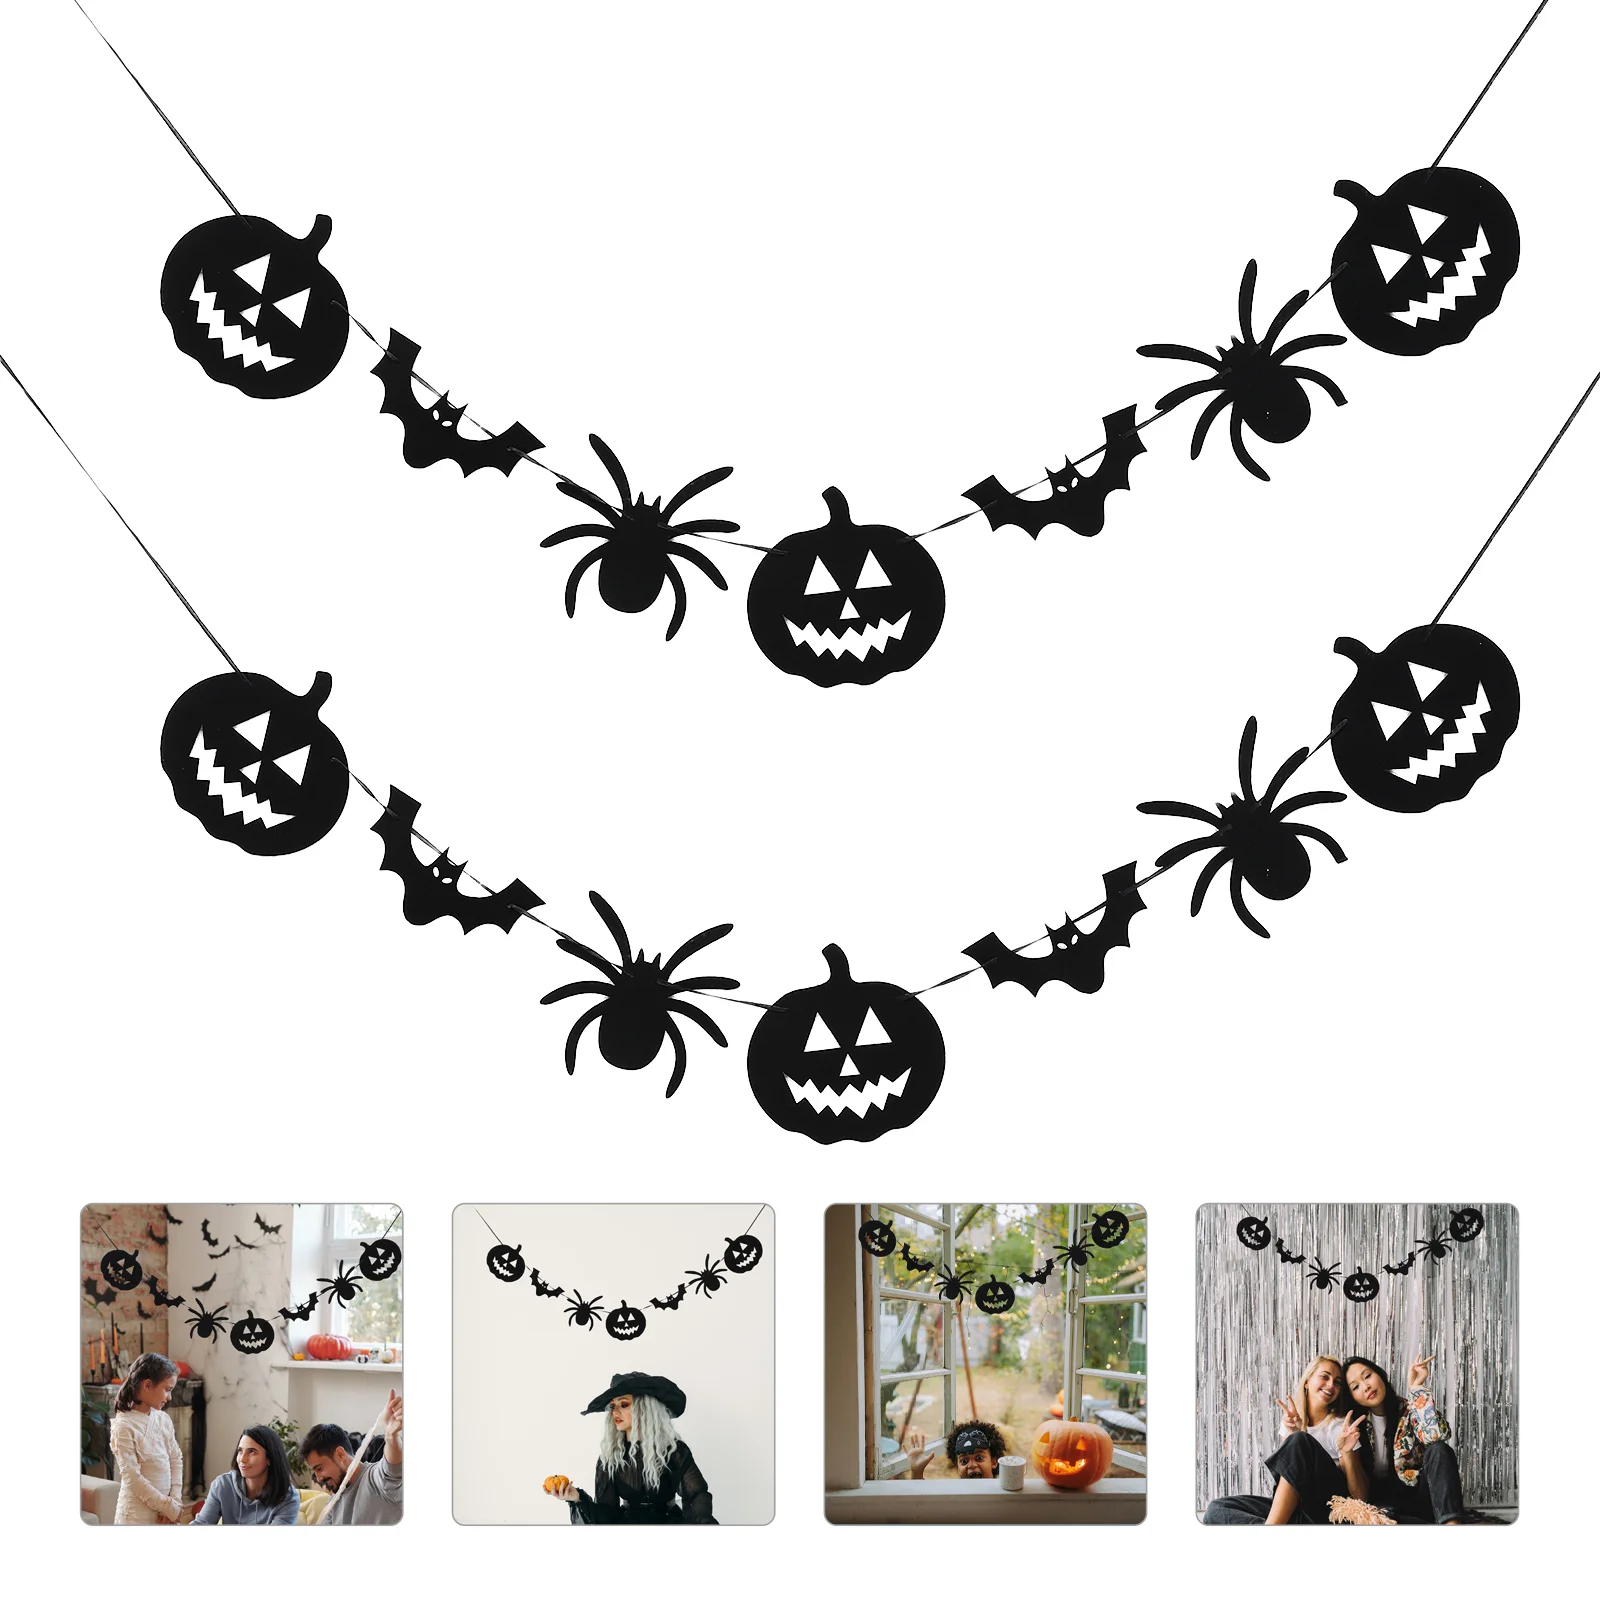 

Banner Felt Garland Bunting Black Hanging Spider Happy Pumpkin Mantle Flag Decorations Party Haunted Treat House Trick Scary Bat